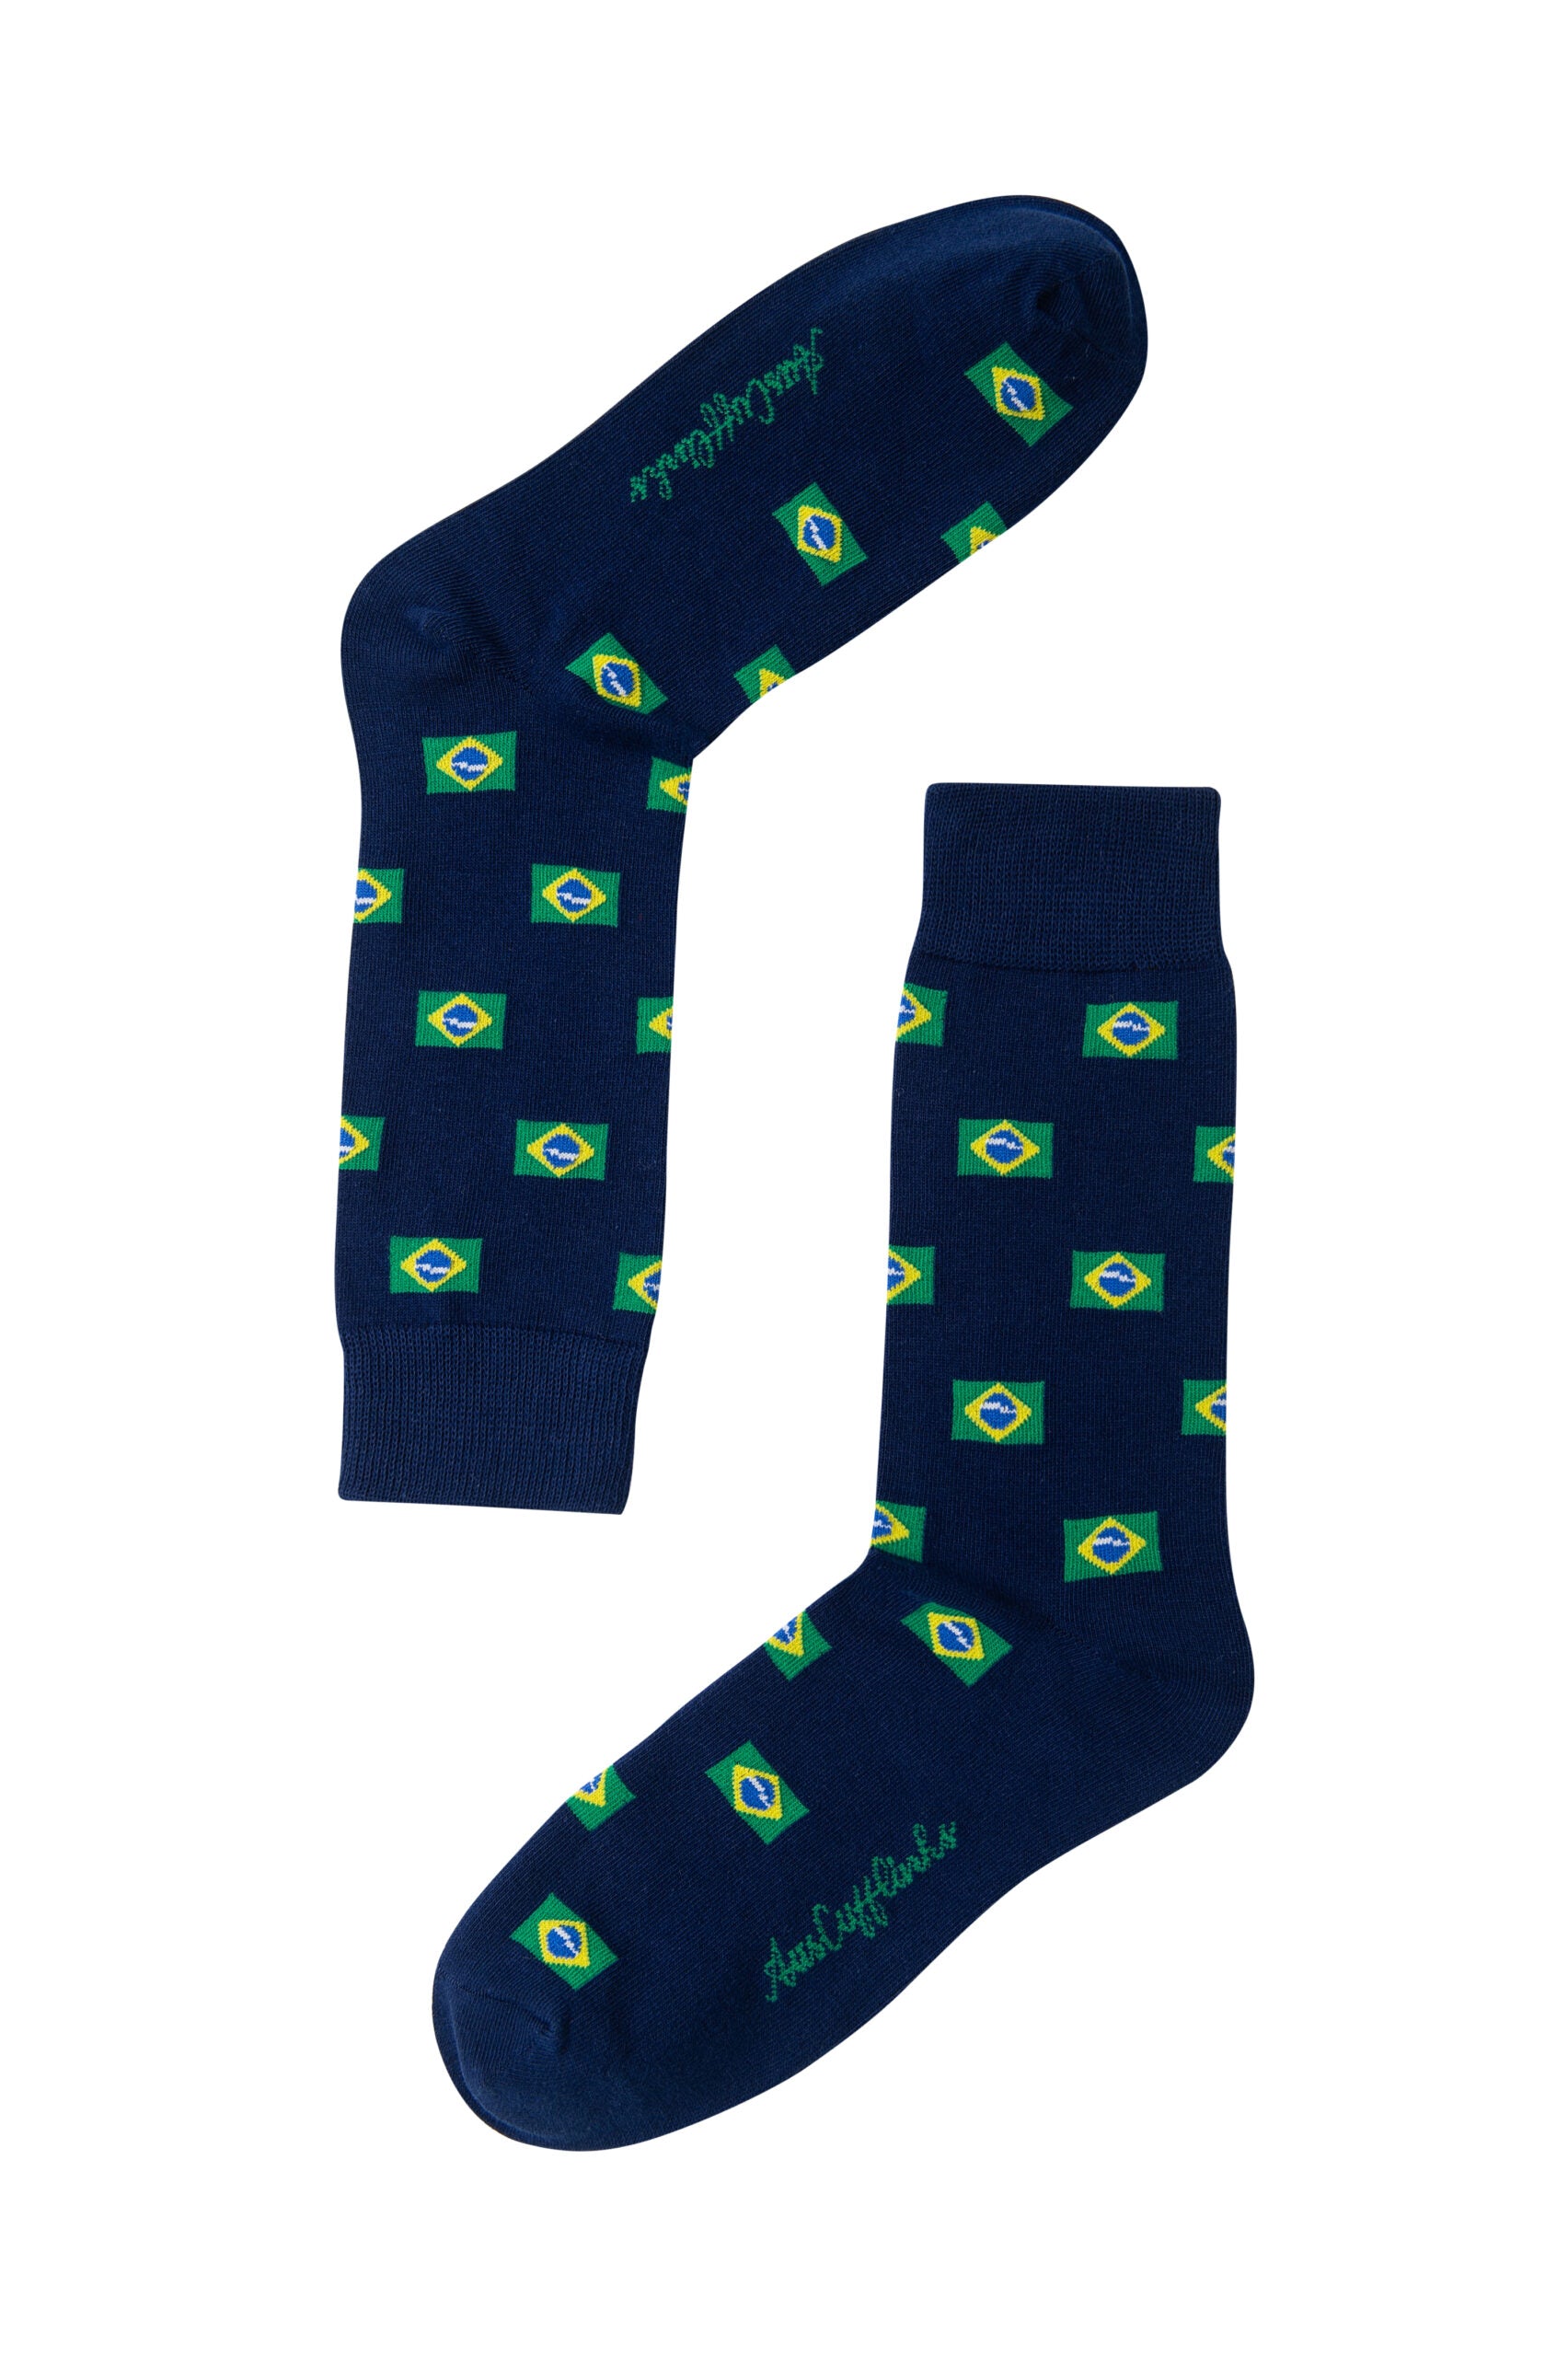 A pair of Brazil Flag Socks with green and yellow designs.